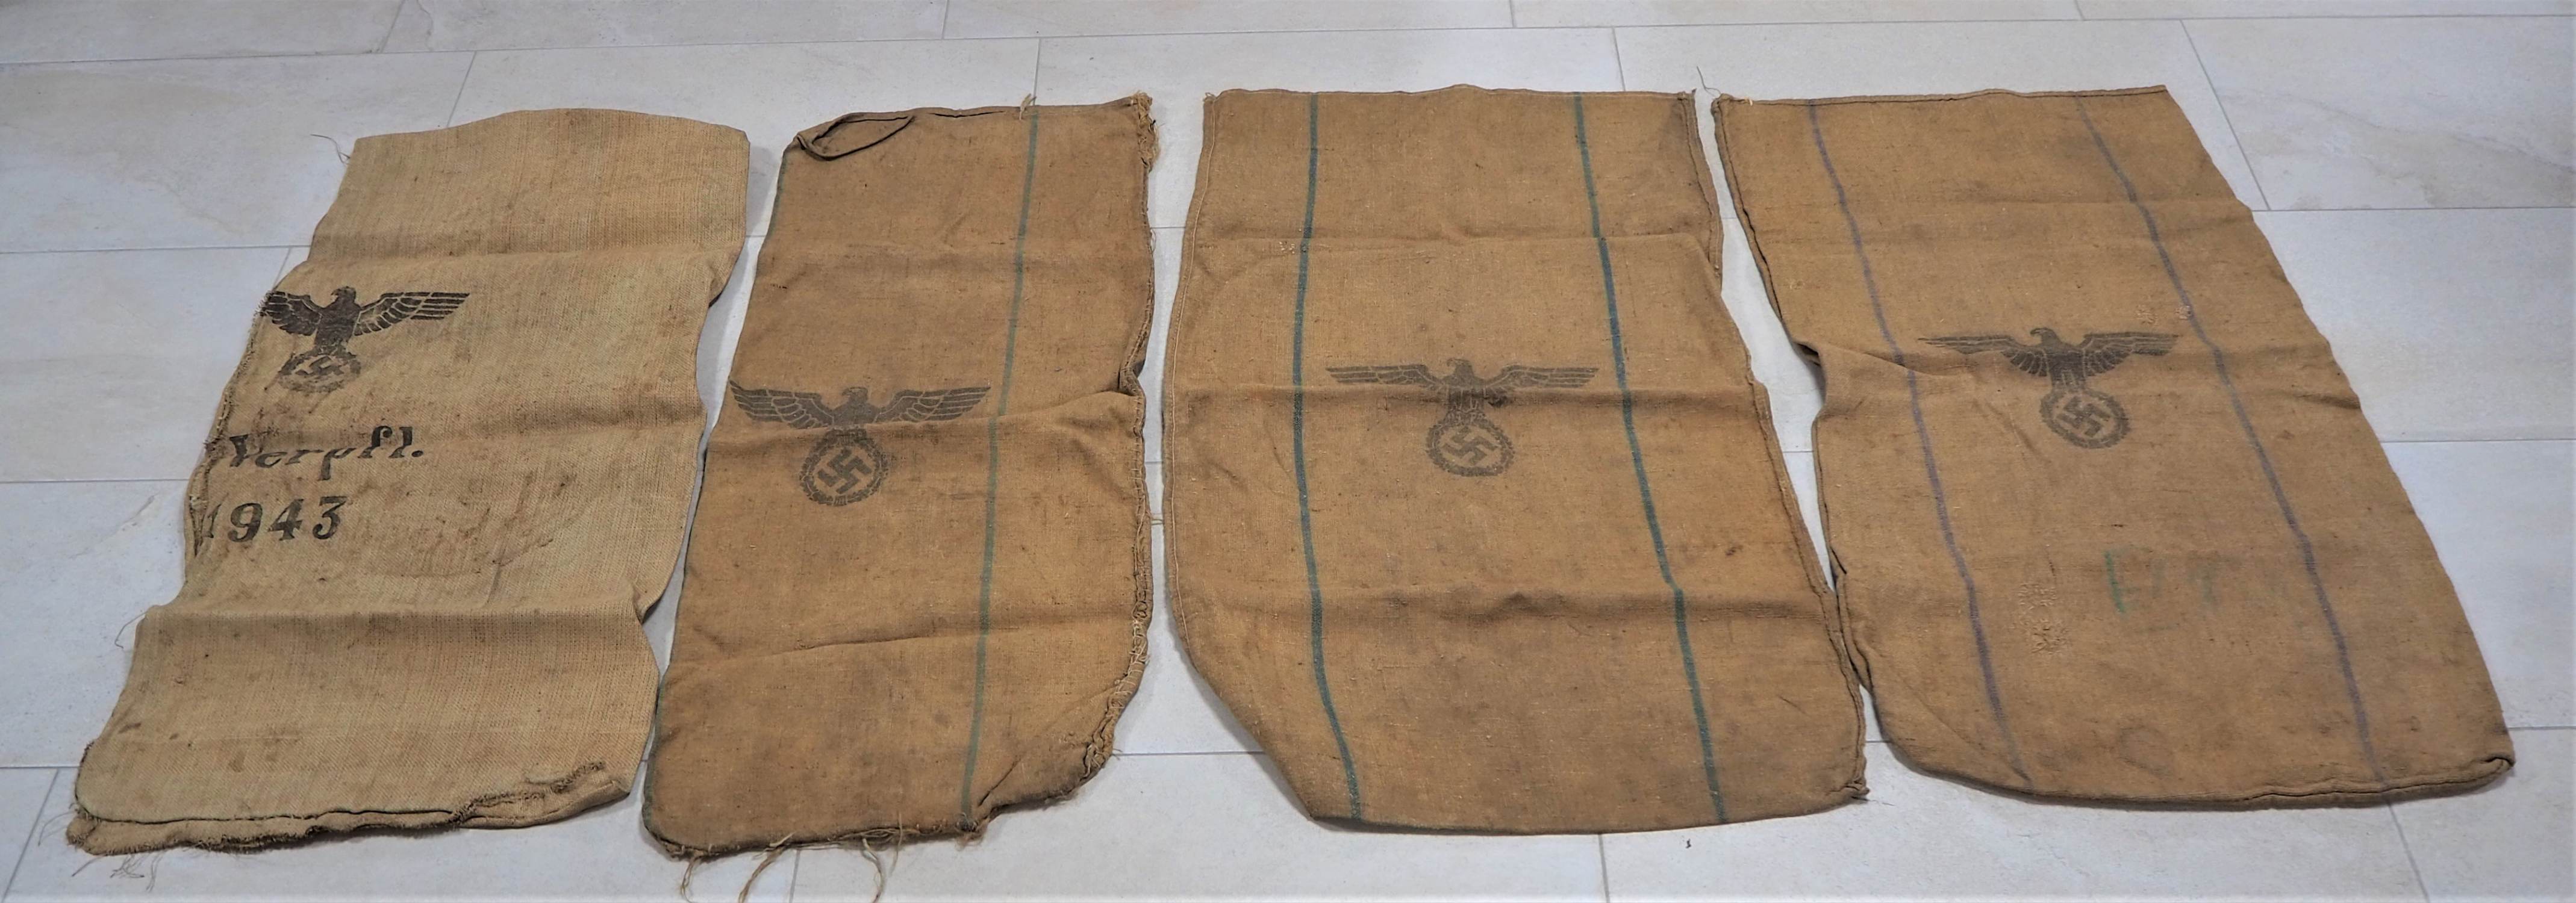 4x Wehrmacht Army rations bag 1937/43, German Reich.